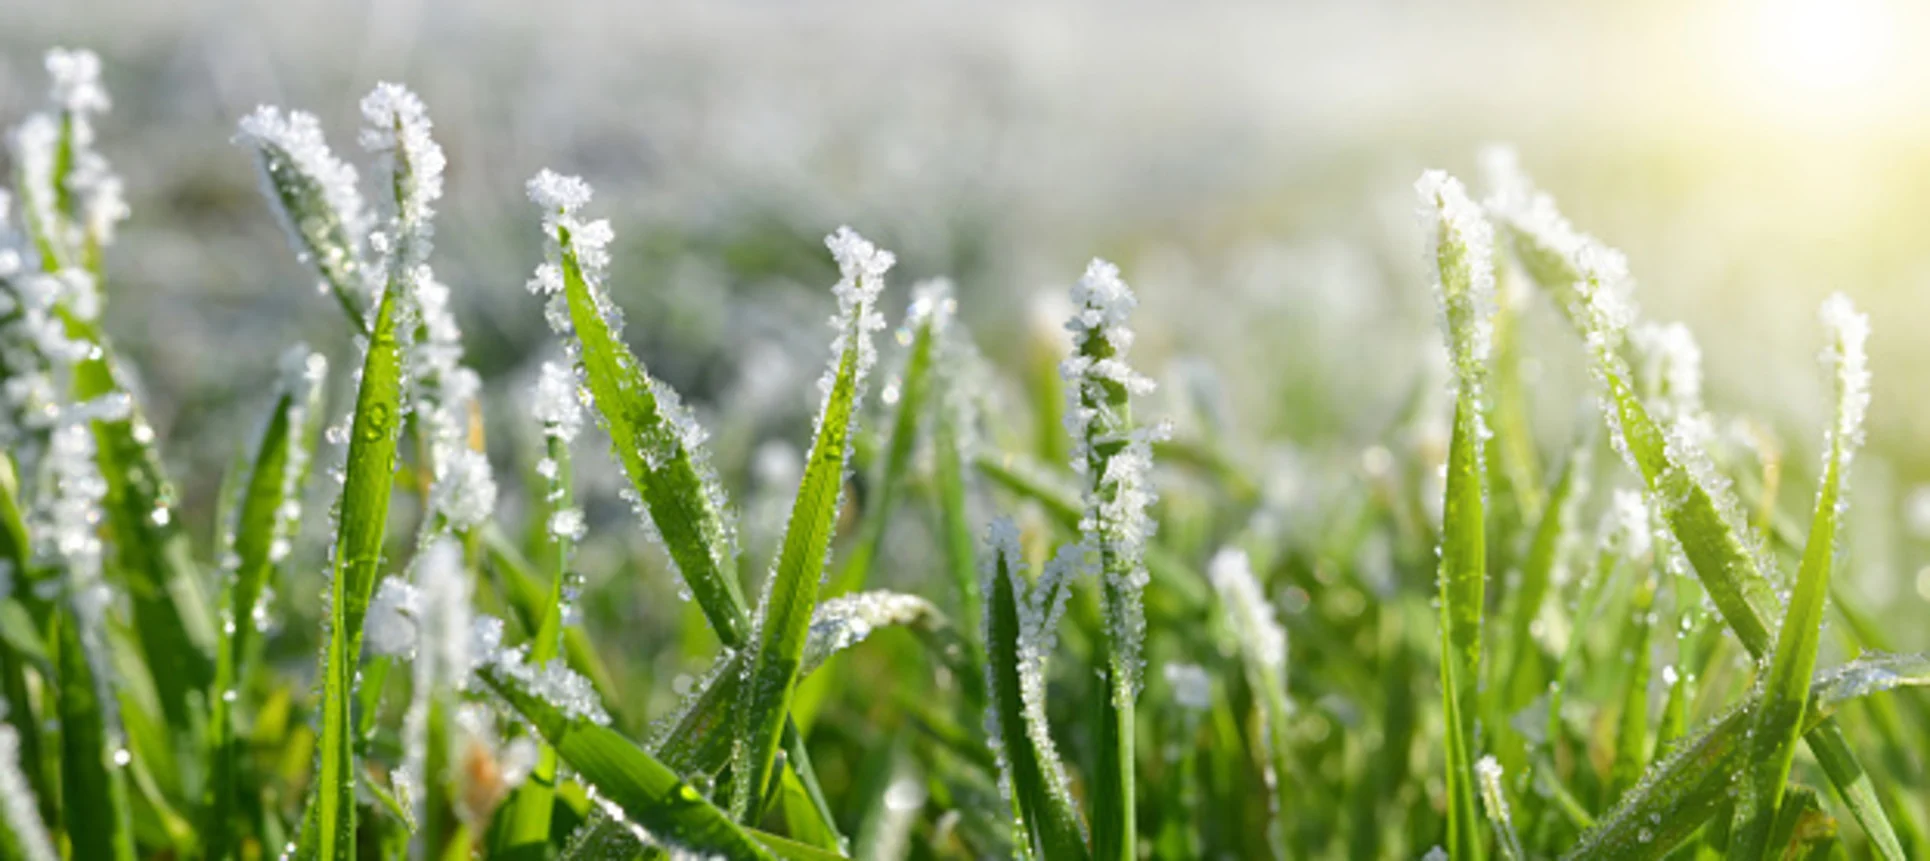 We hate to interrupt your summer, but frost is on the way for some of you